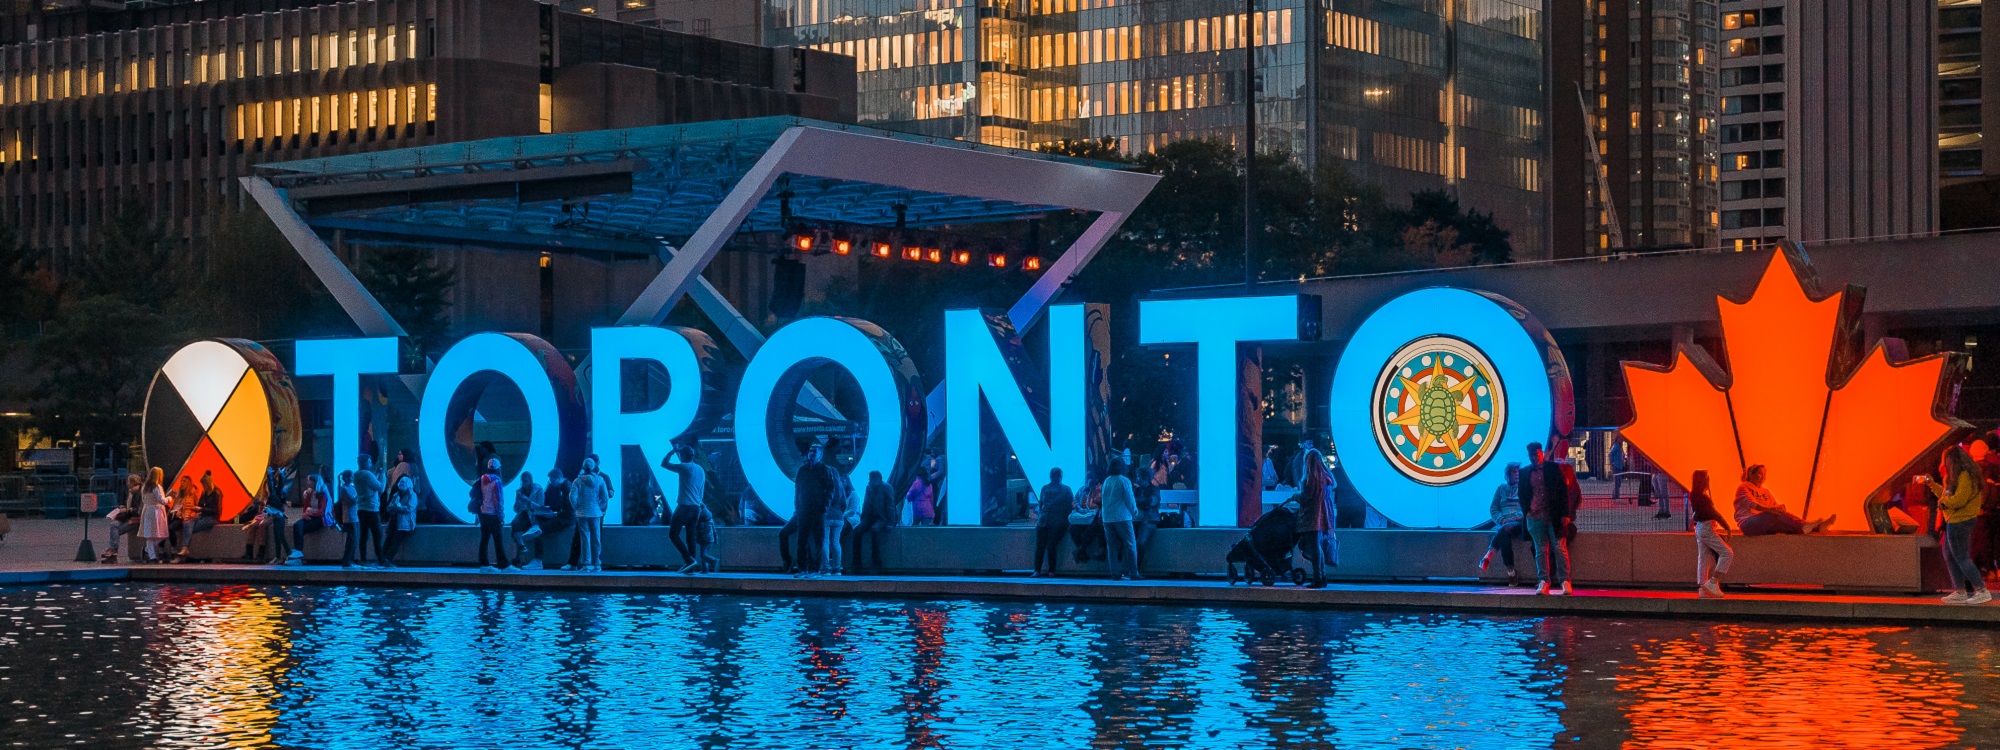 things-to-do-in-toronto-updated